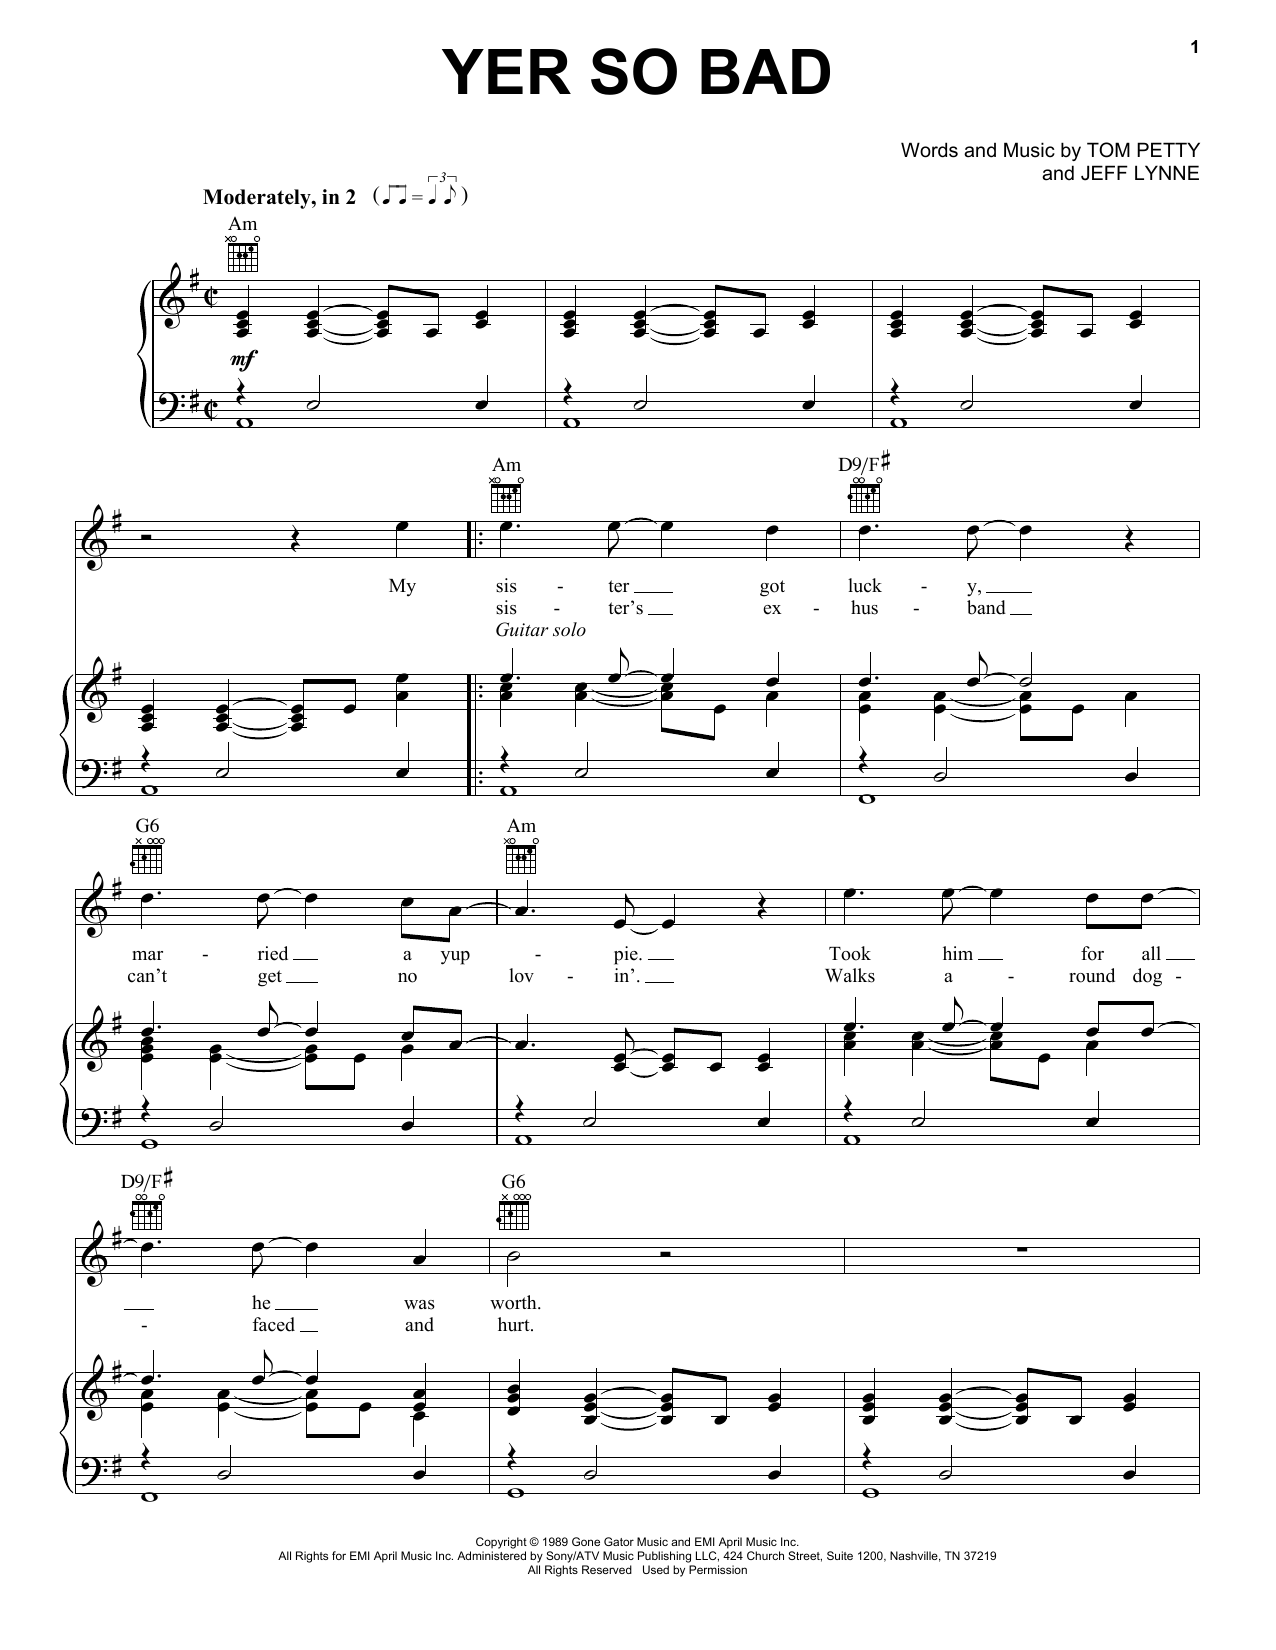 Tom Petty Yer So Bad sheet music notes and chords. Download Printable PDF.